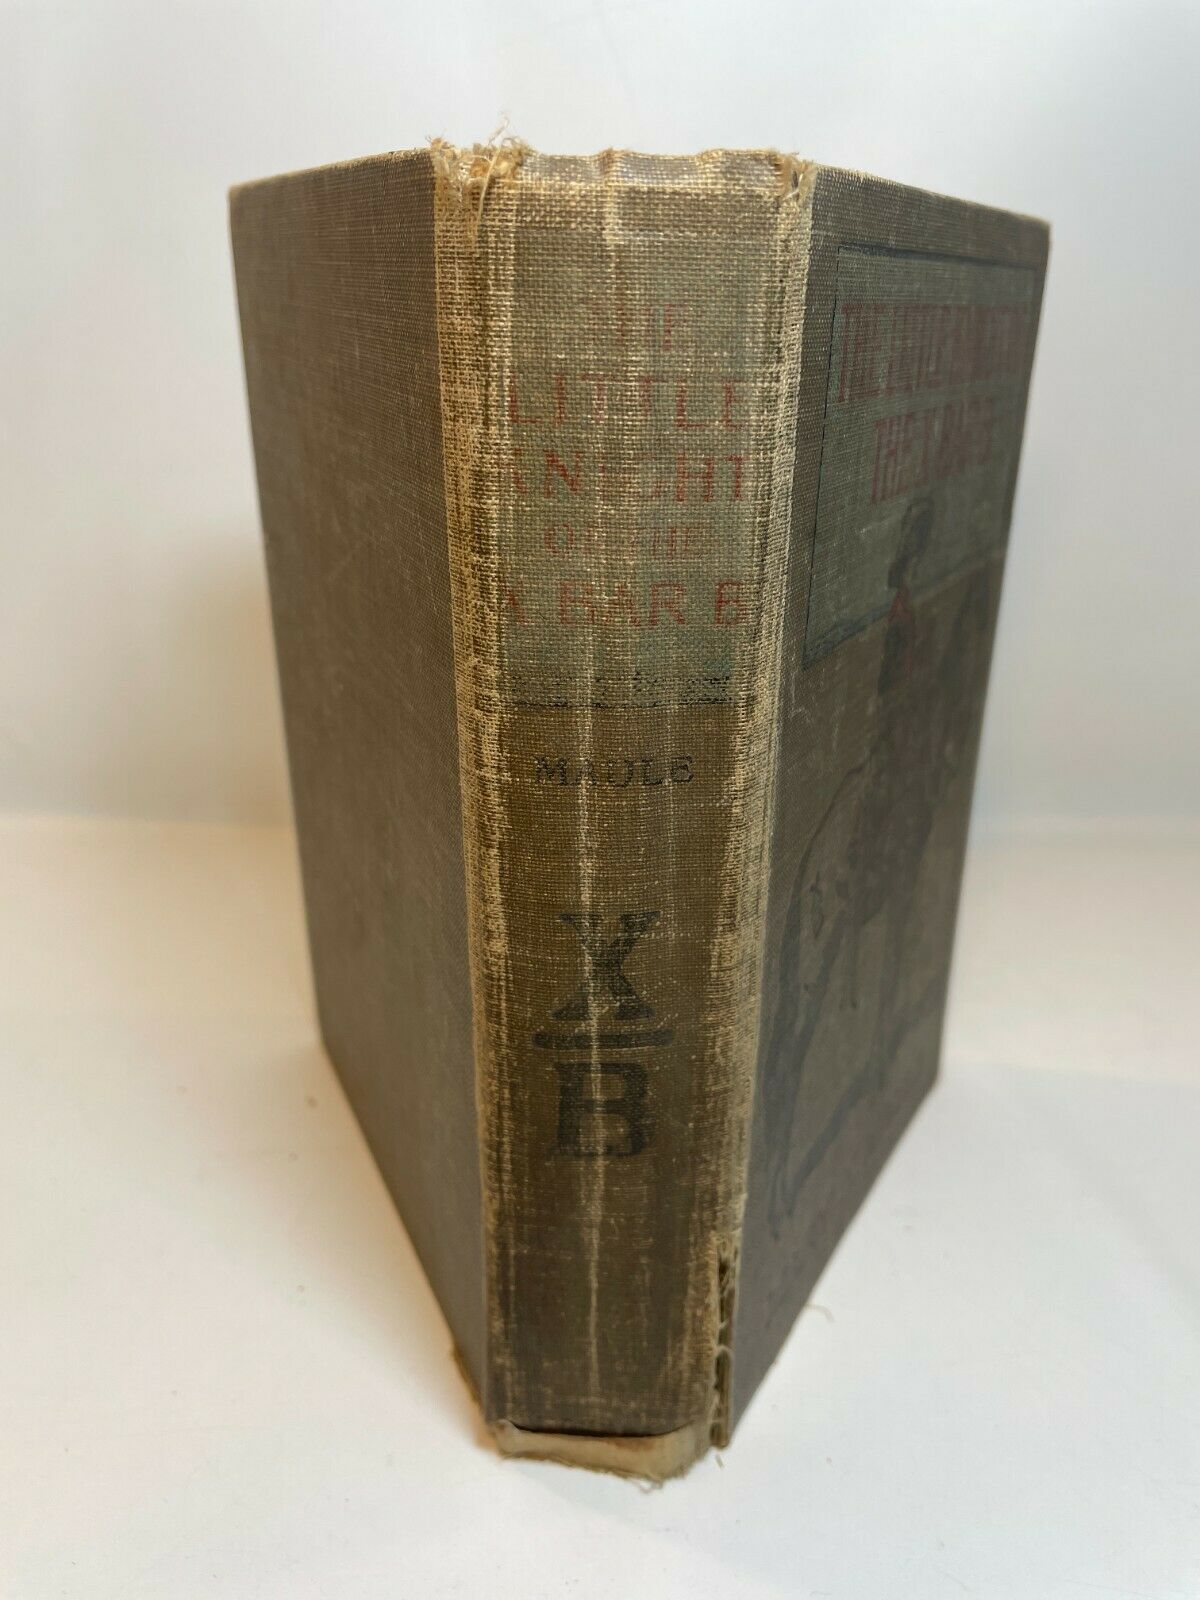 The Little Knight of the X Bar B. Mary K Maule (1911) First Edition, Fifth Print